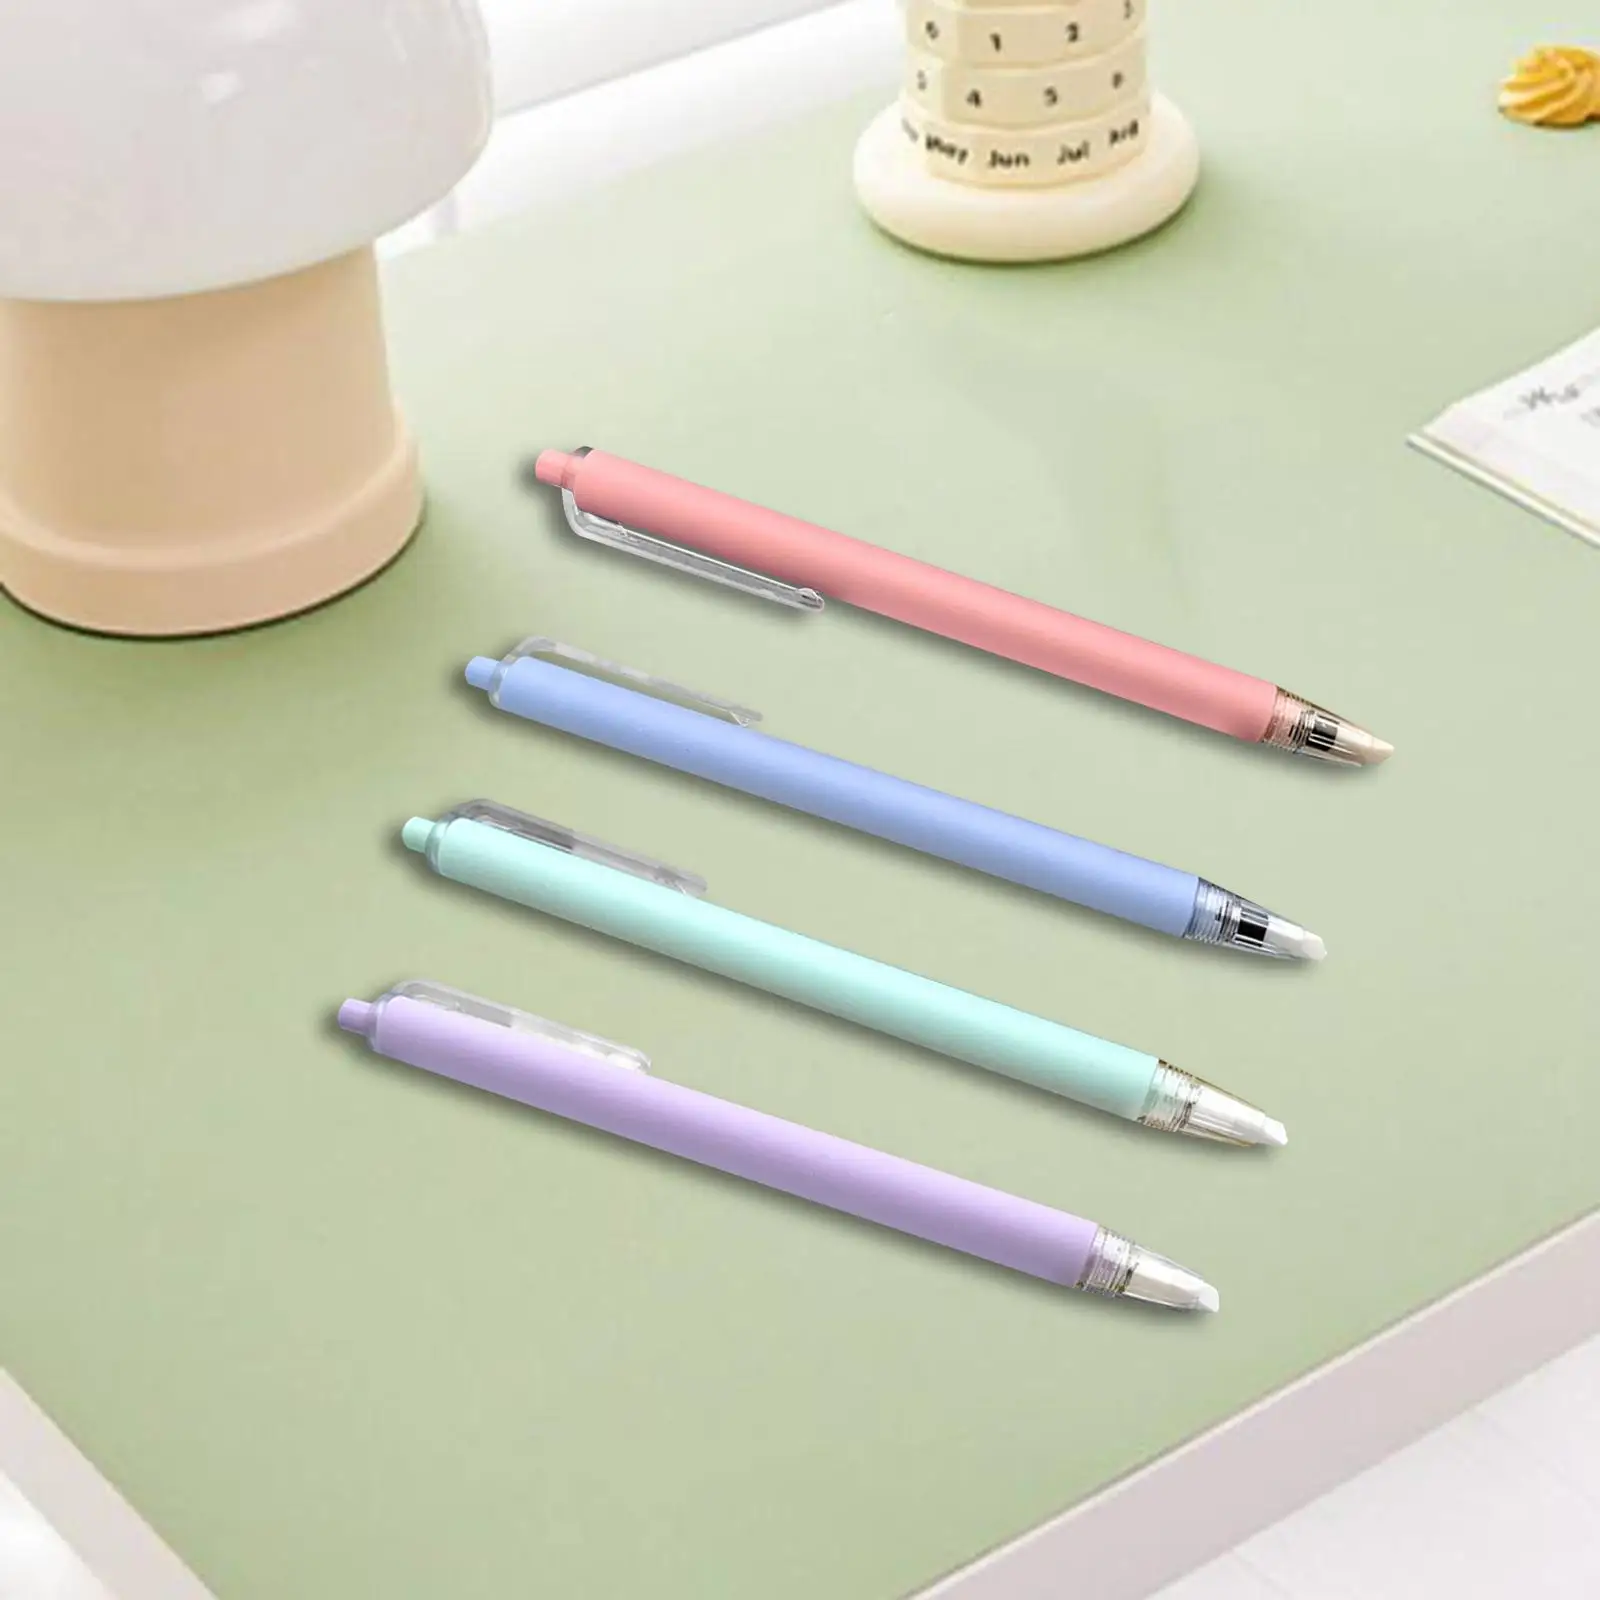 4x Paper Cutting Tool Craft Pens Craft Knives Hobby Knife Paper Cutter Pen for DIY Projects Card Making Art Paper Drawing Artist